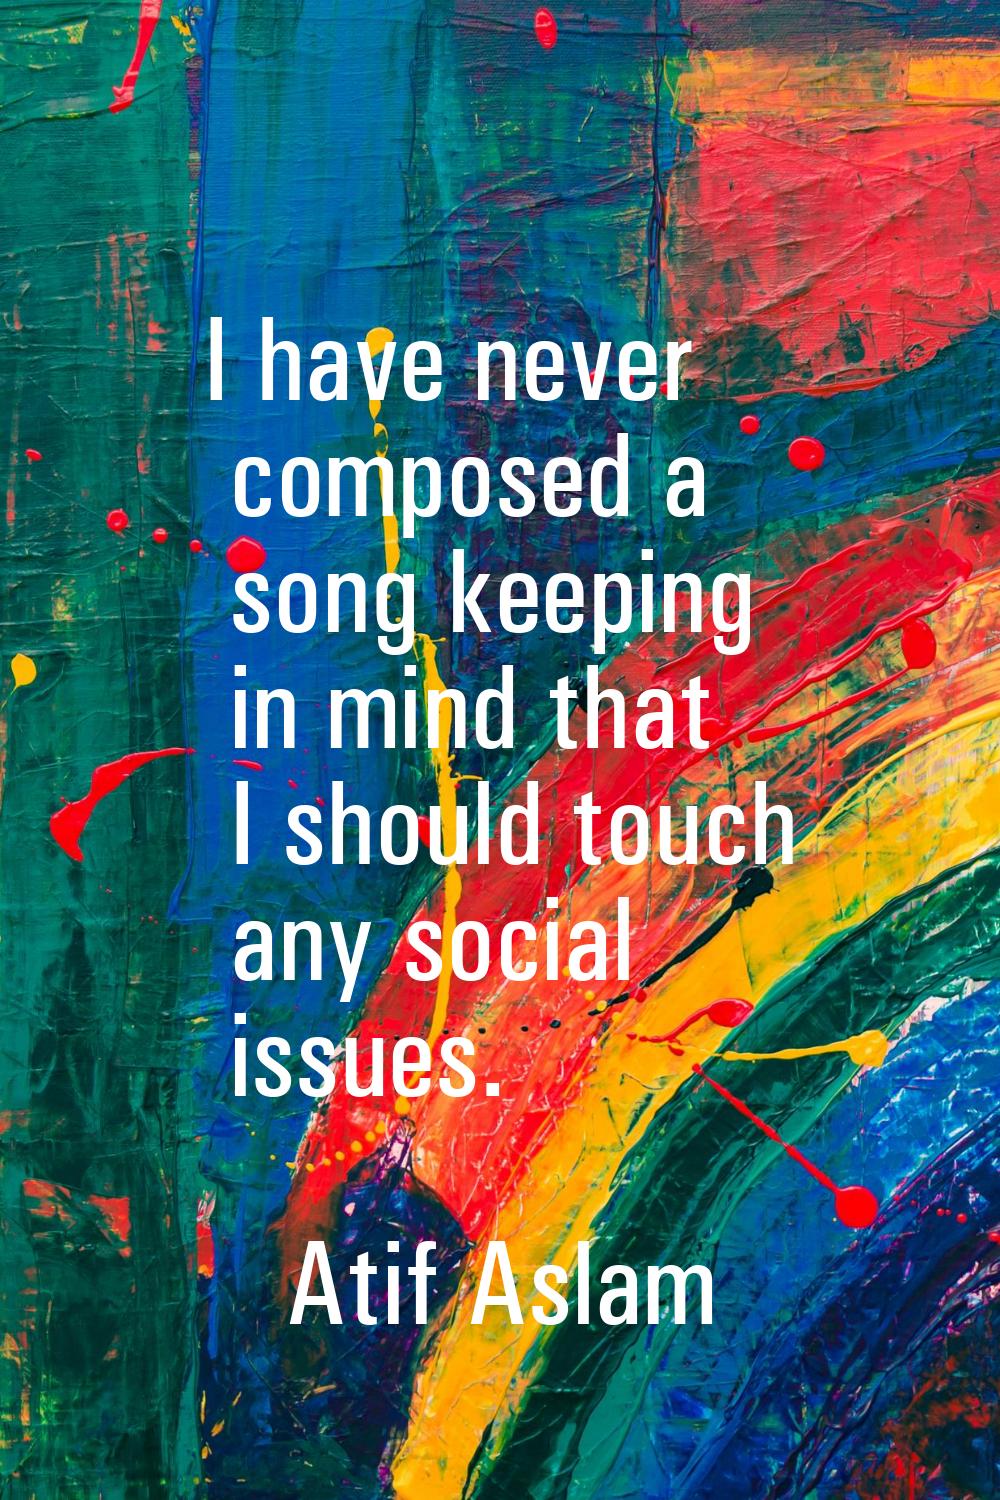 I have never composed a song keeping in mind that I should touch any social issues.